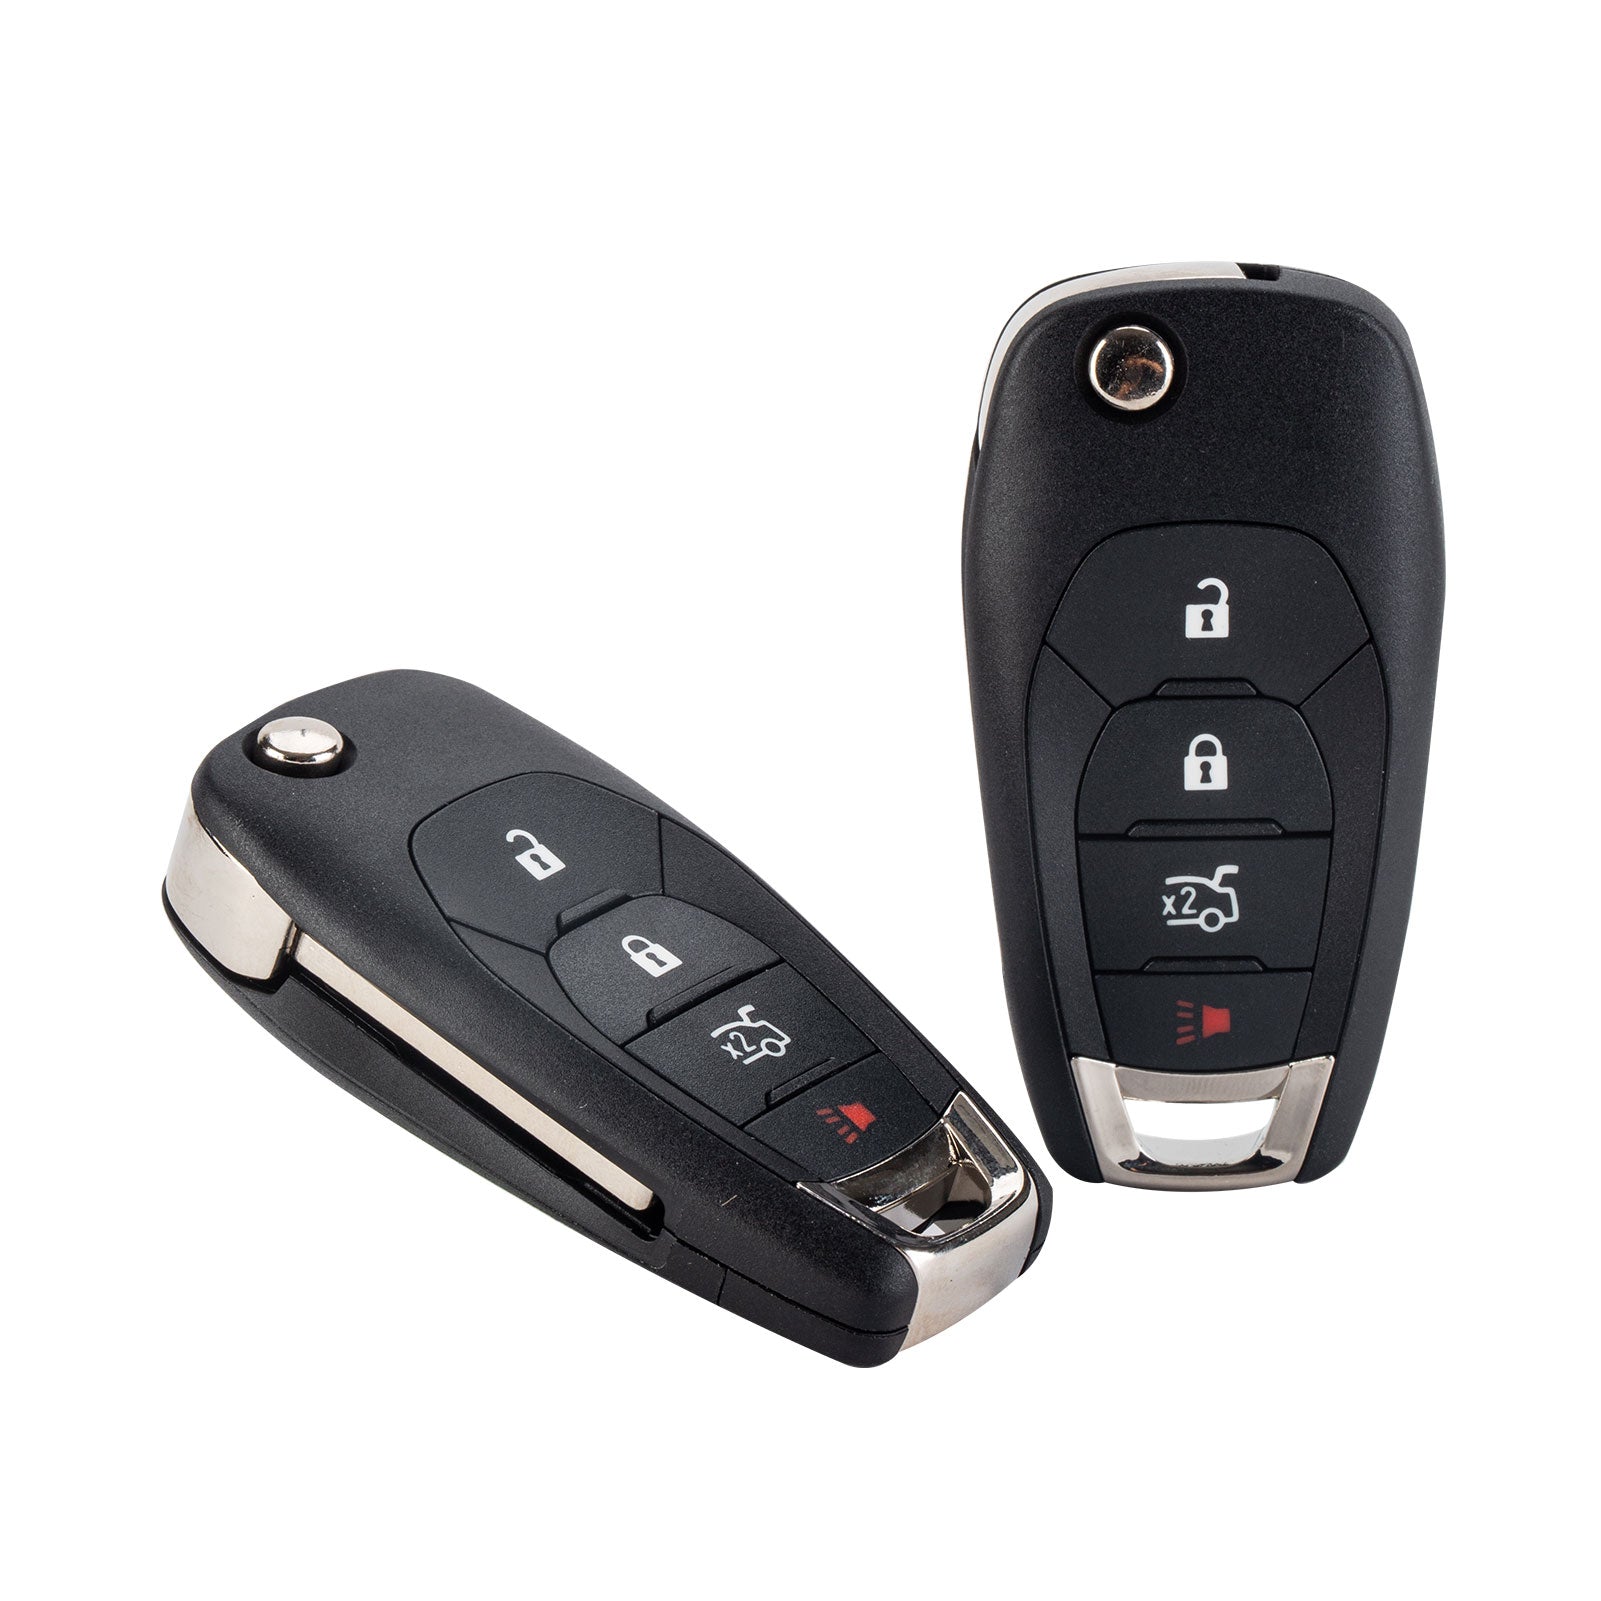 4 BTN Keyless Entry Remote 433MHZ Car Key Replacement for 2016-2019-Cruze XL8 Systems Only LXP-T004  KR-C4SD